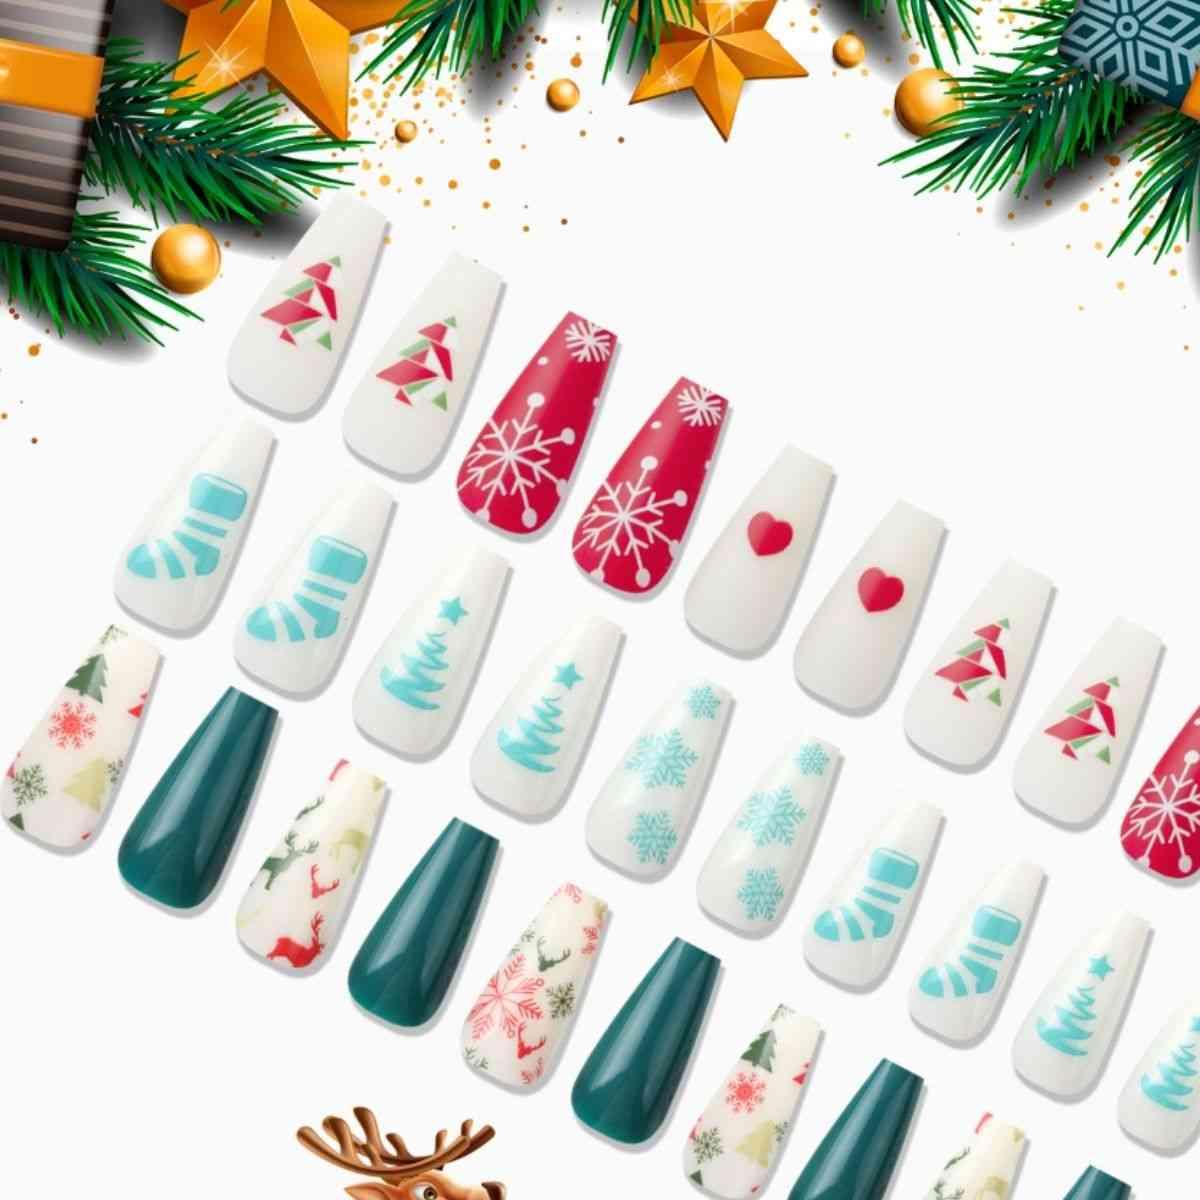 Festive 72-Piece Christmas Nail Set for Elevated Holiday Glam